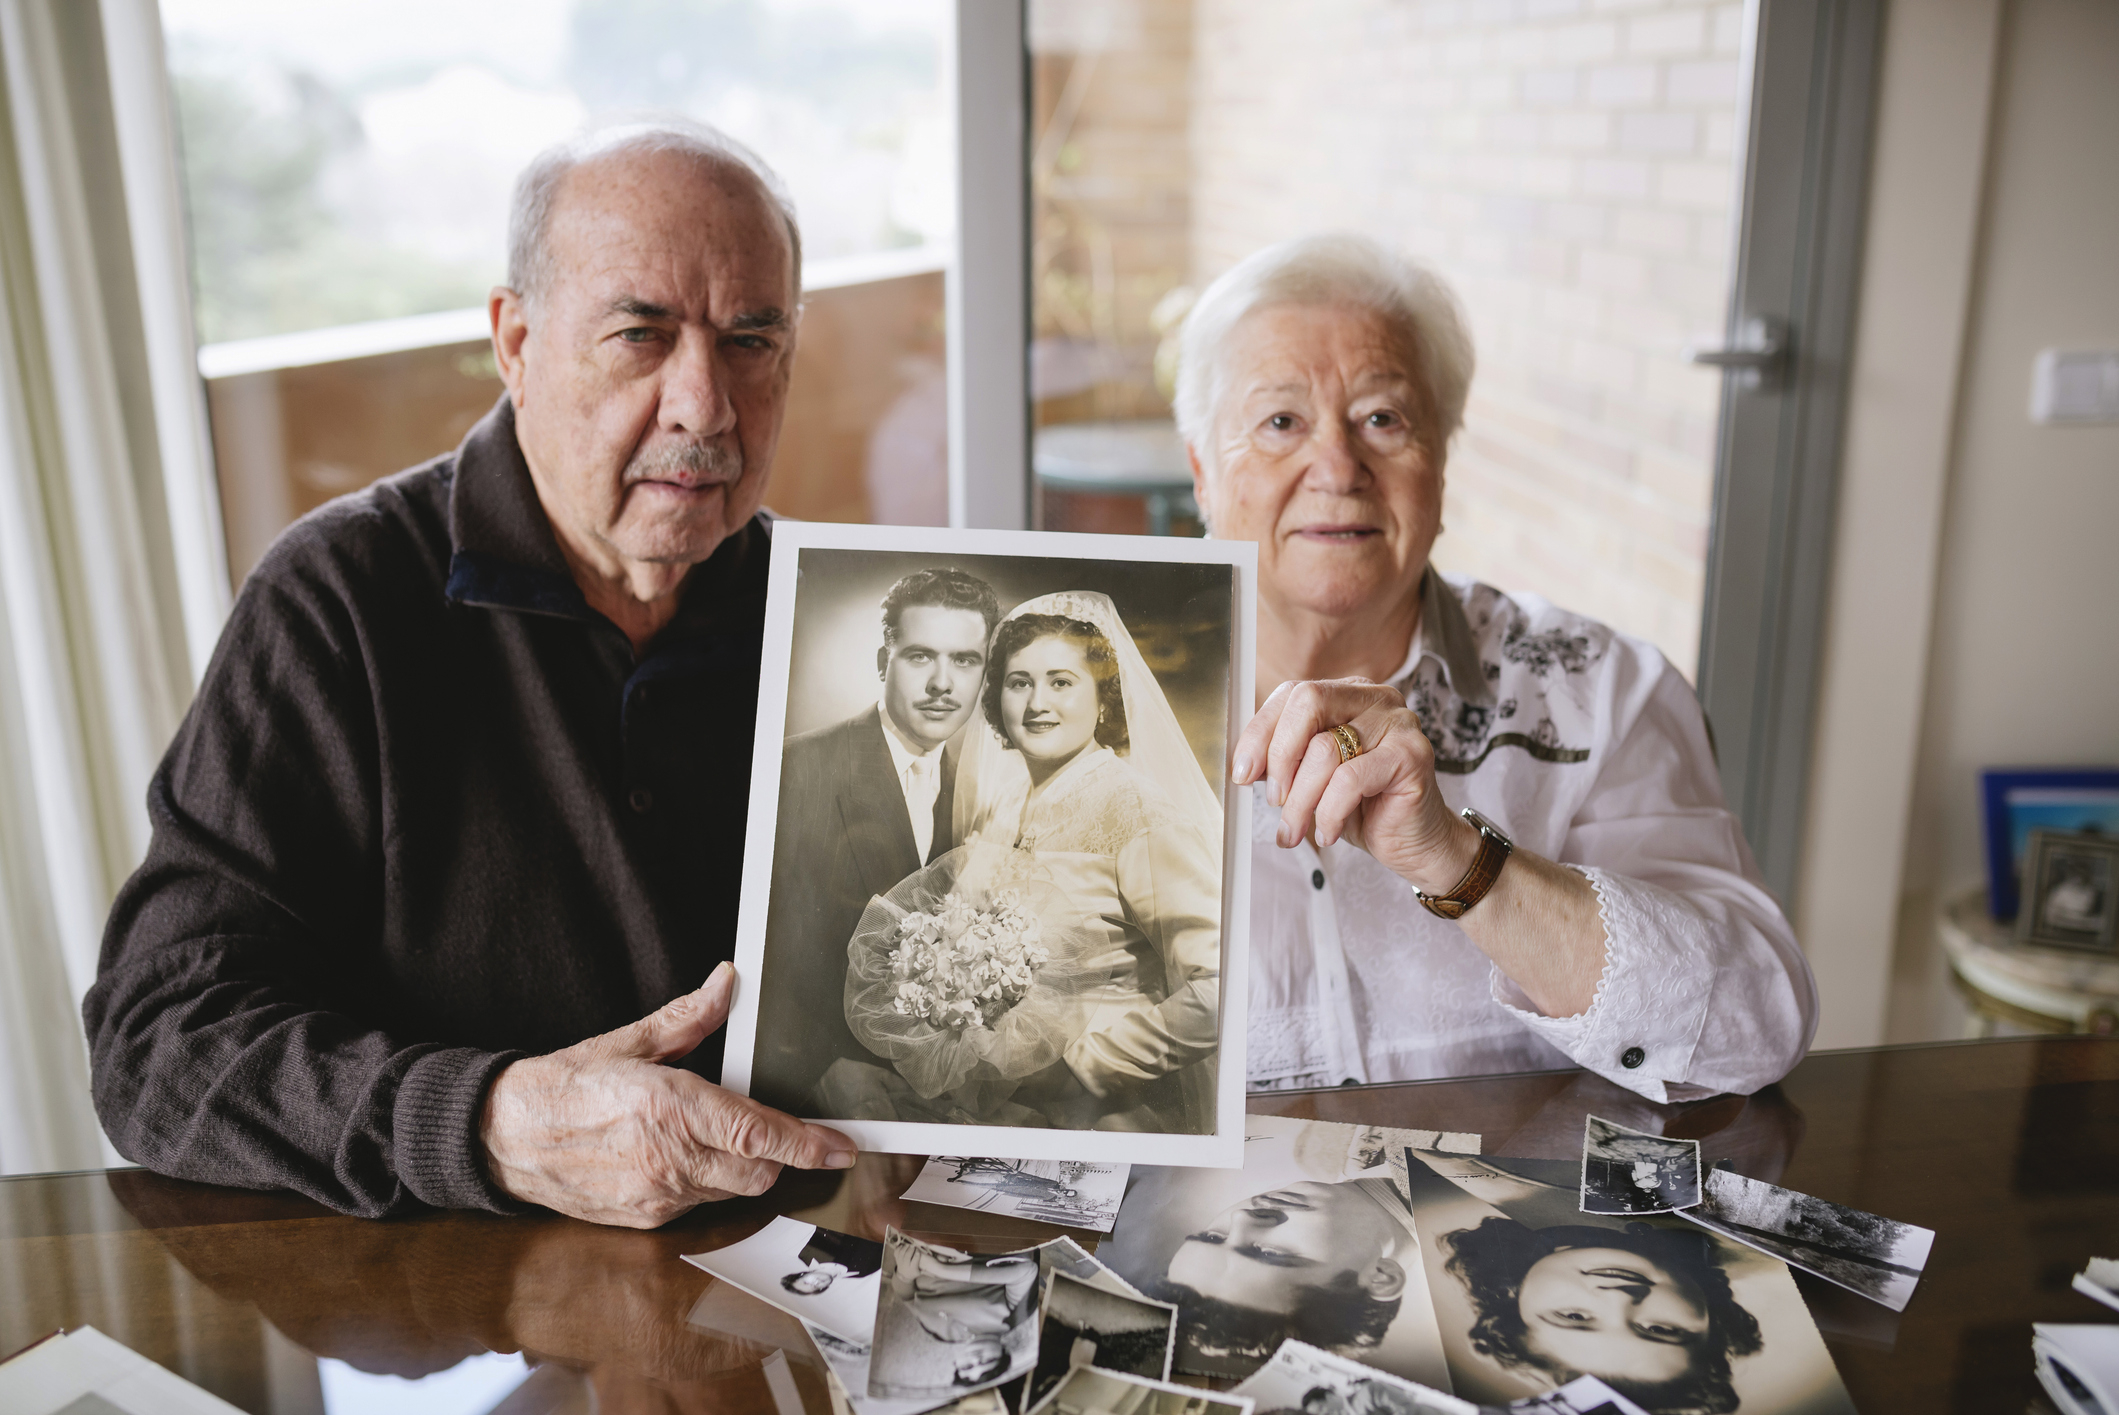 Two elderly individuals holding a framed wedding photo, surrounded by loose photographs on a table